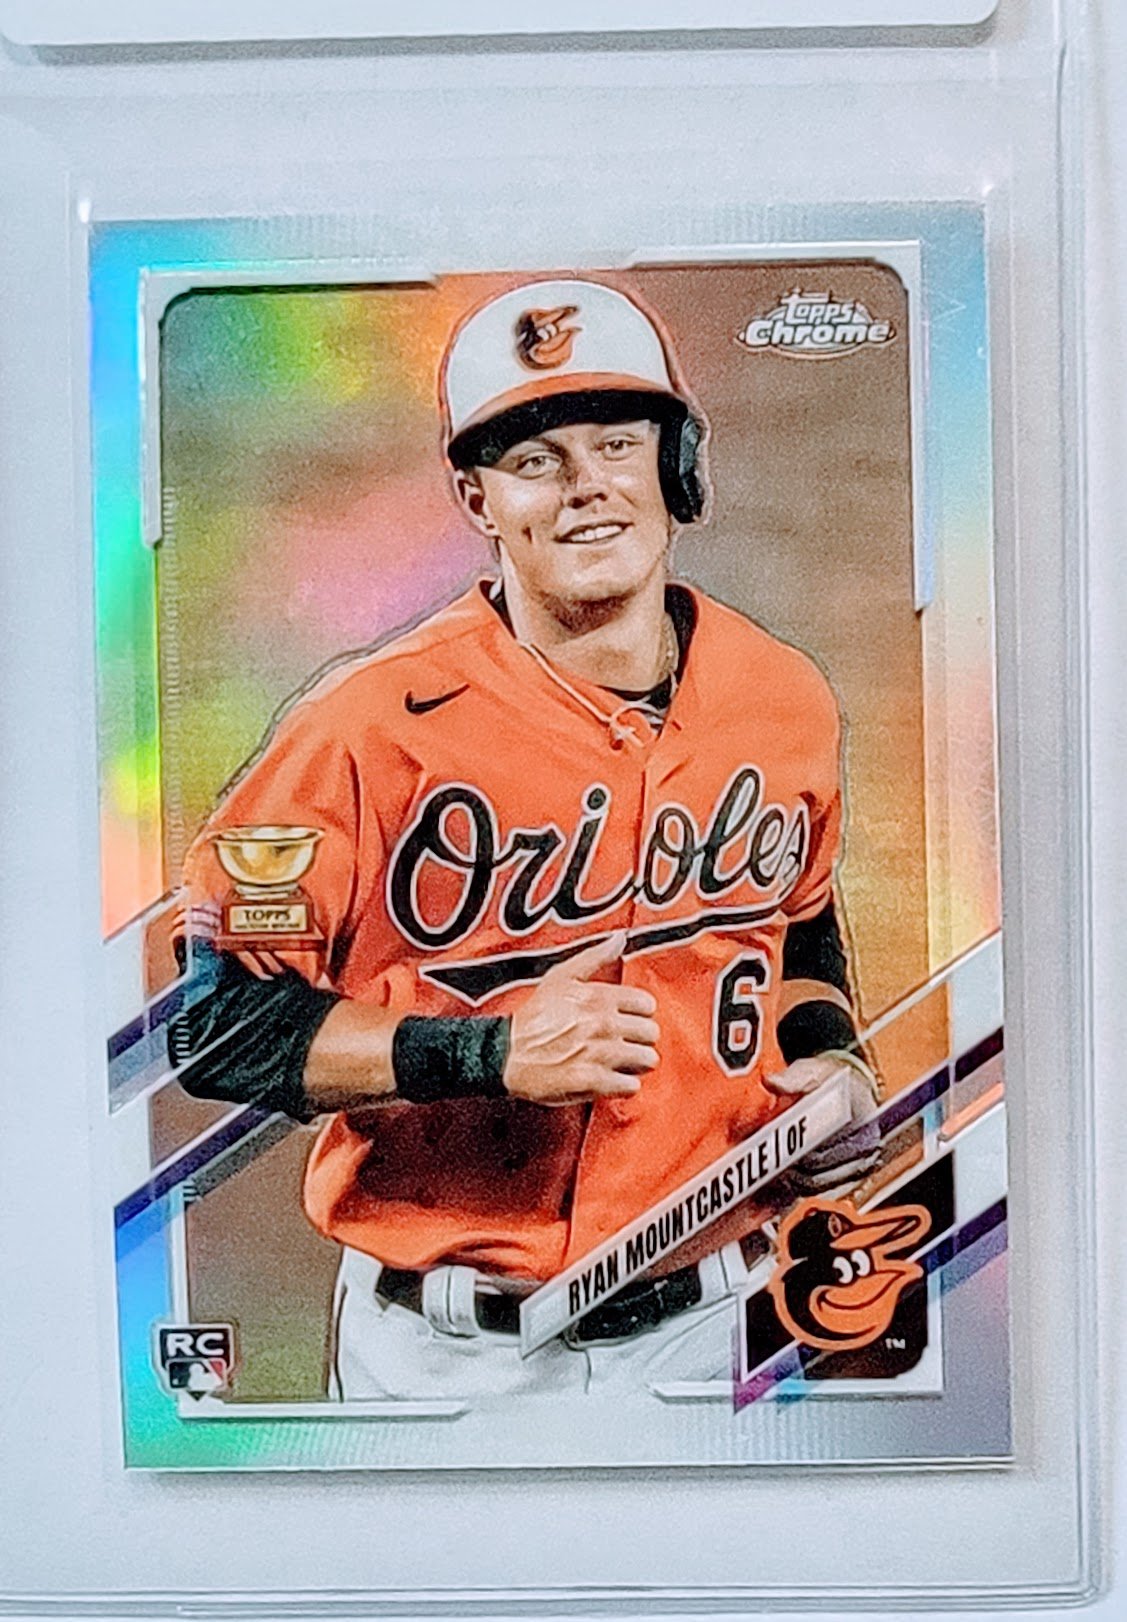 2021 Topps Chrome Ryan Mountcastle All Star Rookie Refractor Baseball Trading Card TPTV simple Xclusive Collectibles   